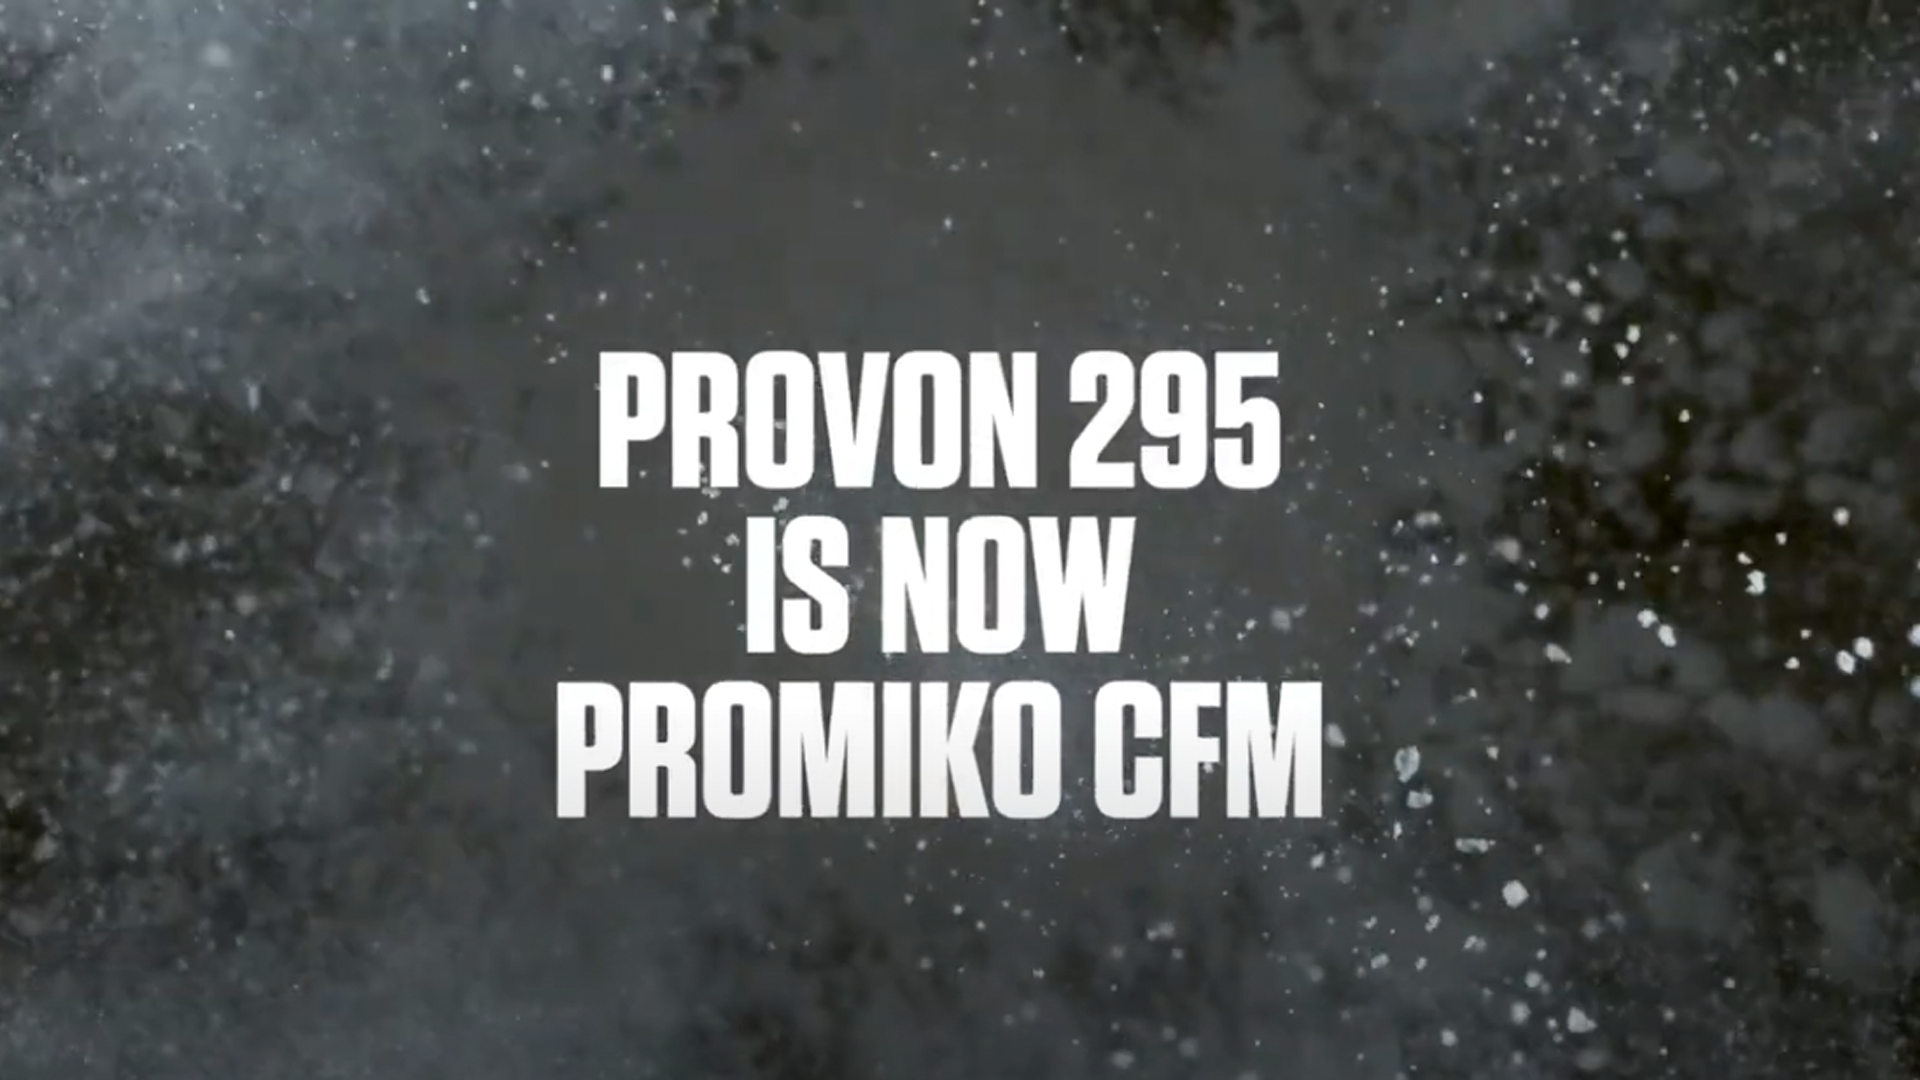 A Deep Look at the Evolution of Protein Raw Materials: From Provon 295 to Promiko in Spain